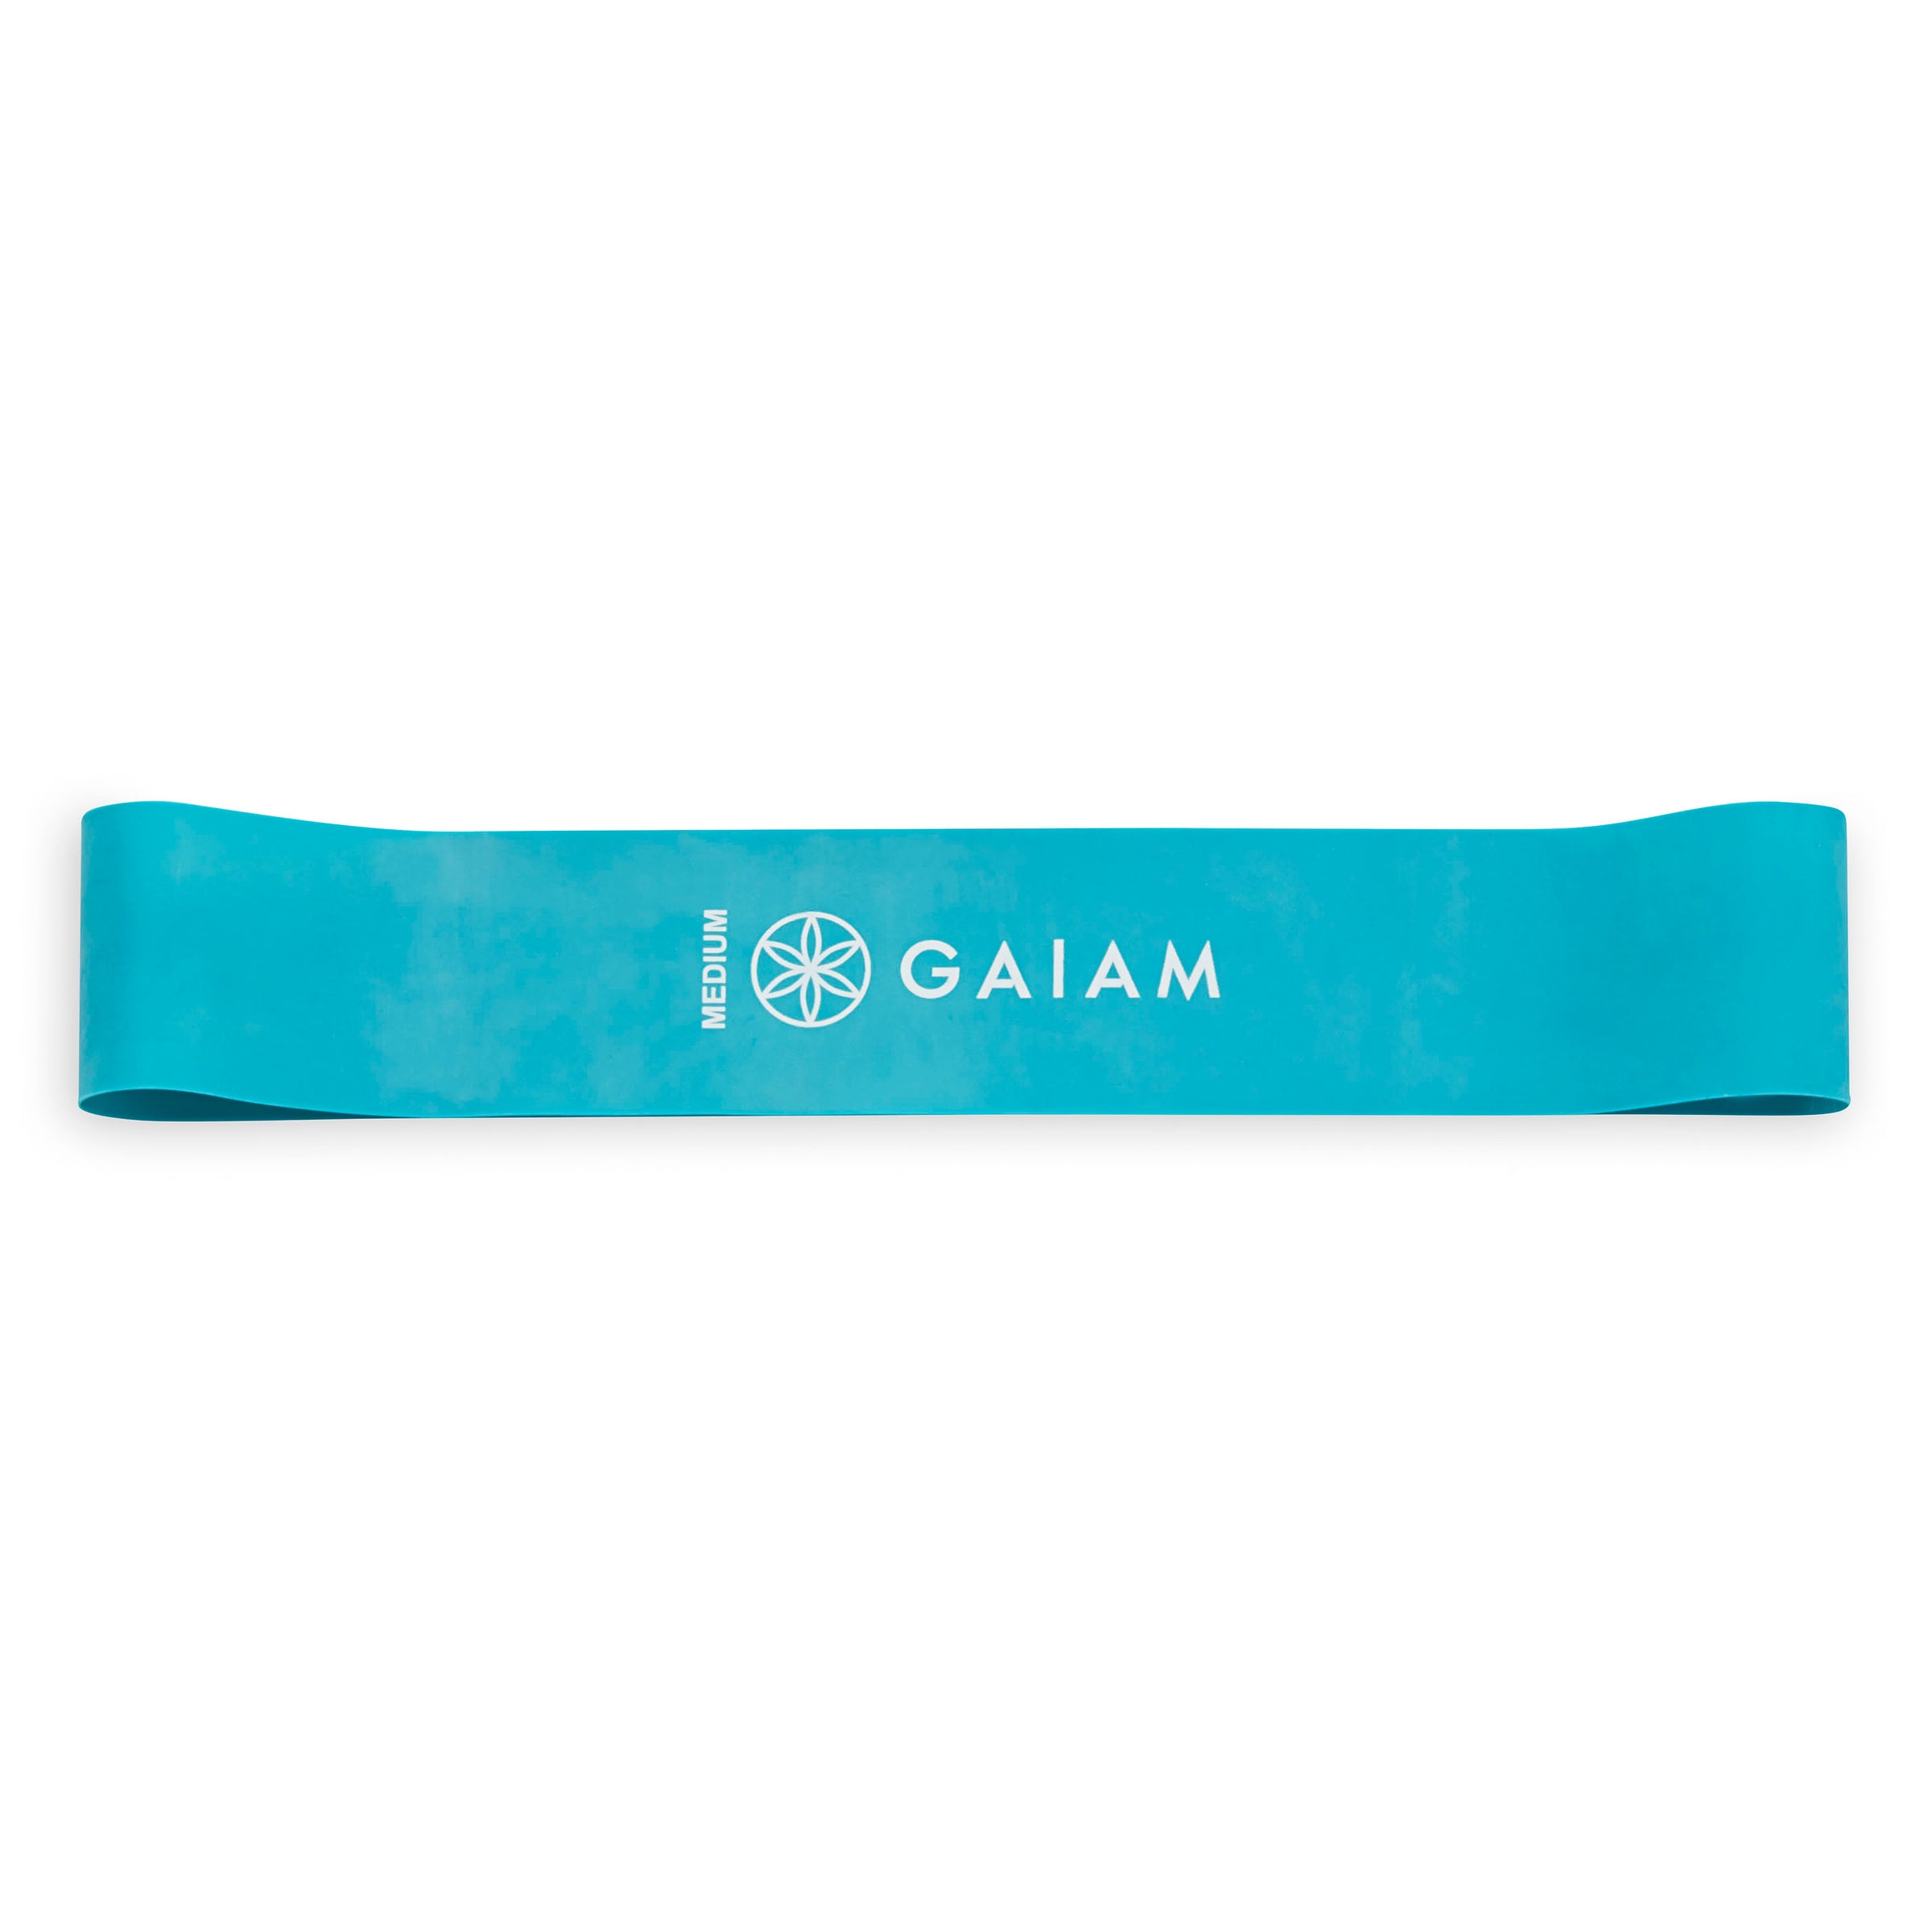  Gaiam Restore Mini Band Kit, Set of 3, Light, Medium, Heavy  Lower Body Loop Resistance Bands for Legs and Booty Exercises & Workouts,  15 x 4 Bands : Everything Else